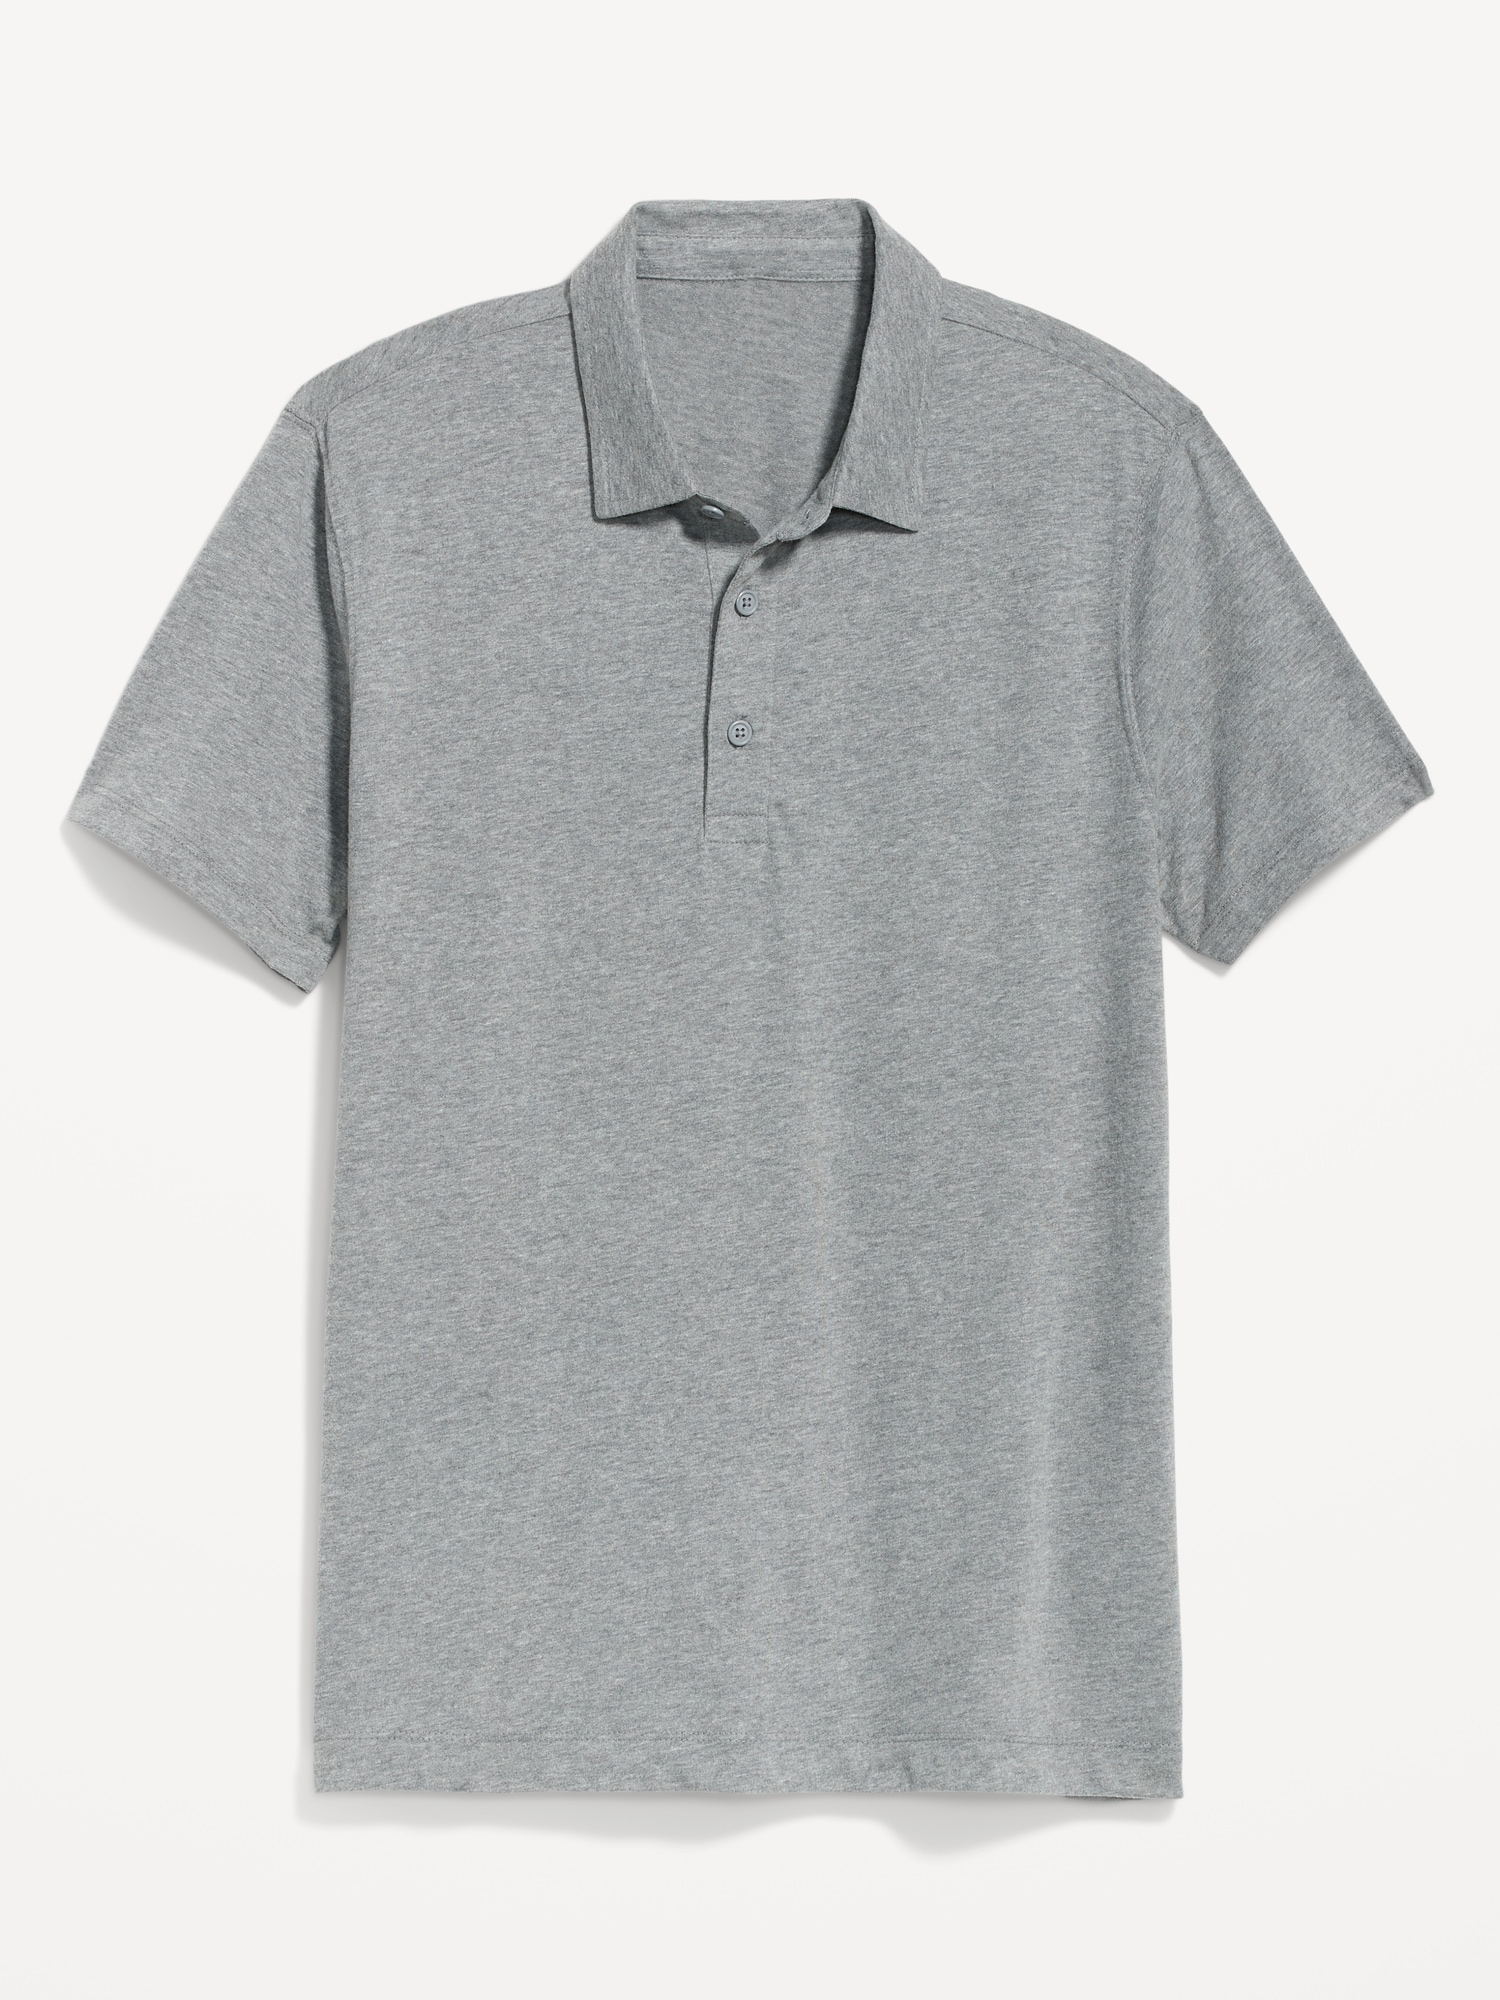 Old Navy Classic Fit Jersey Polo for Men gray. 1